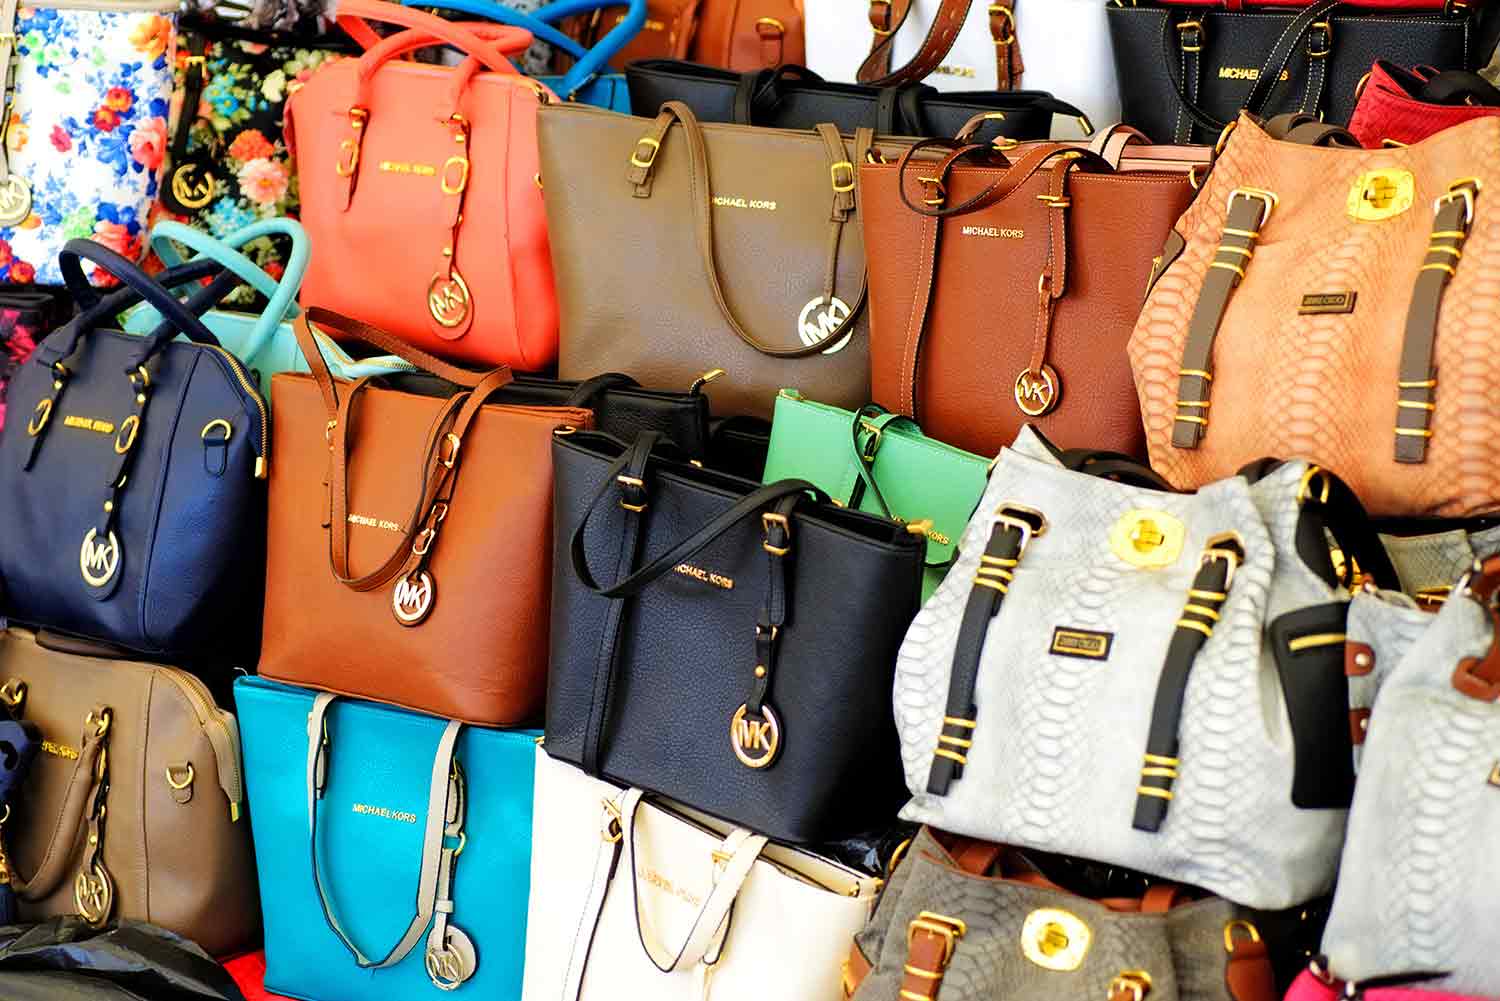 Purses of different colors on display